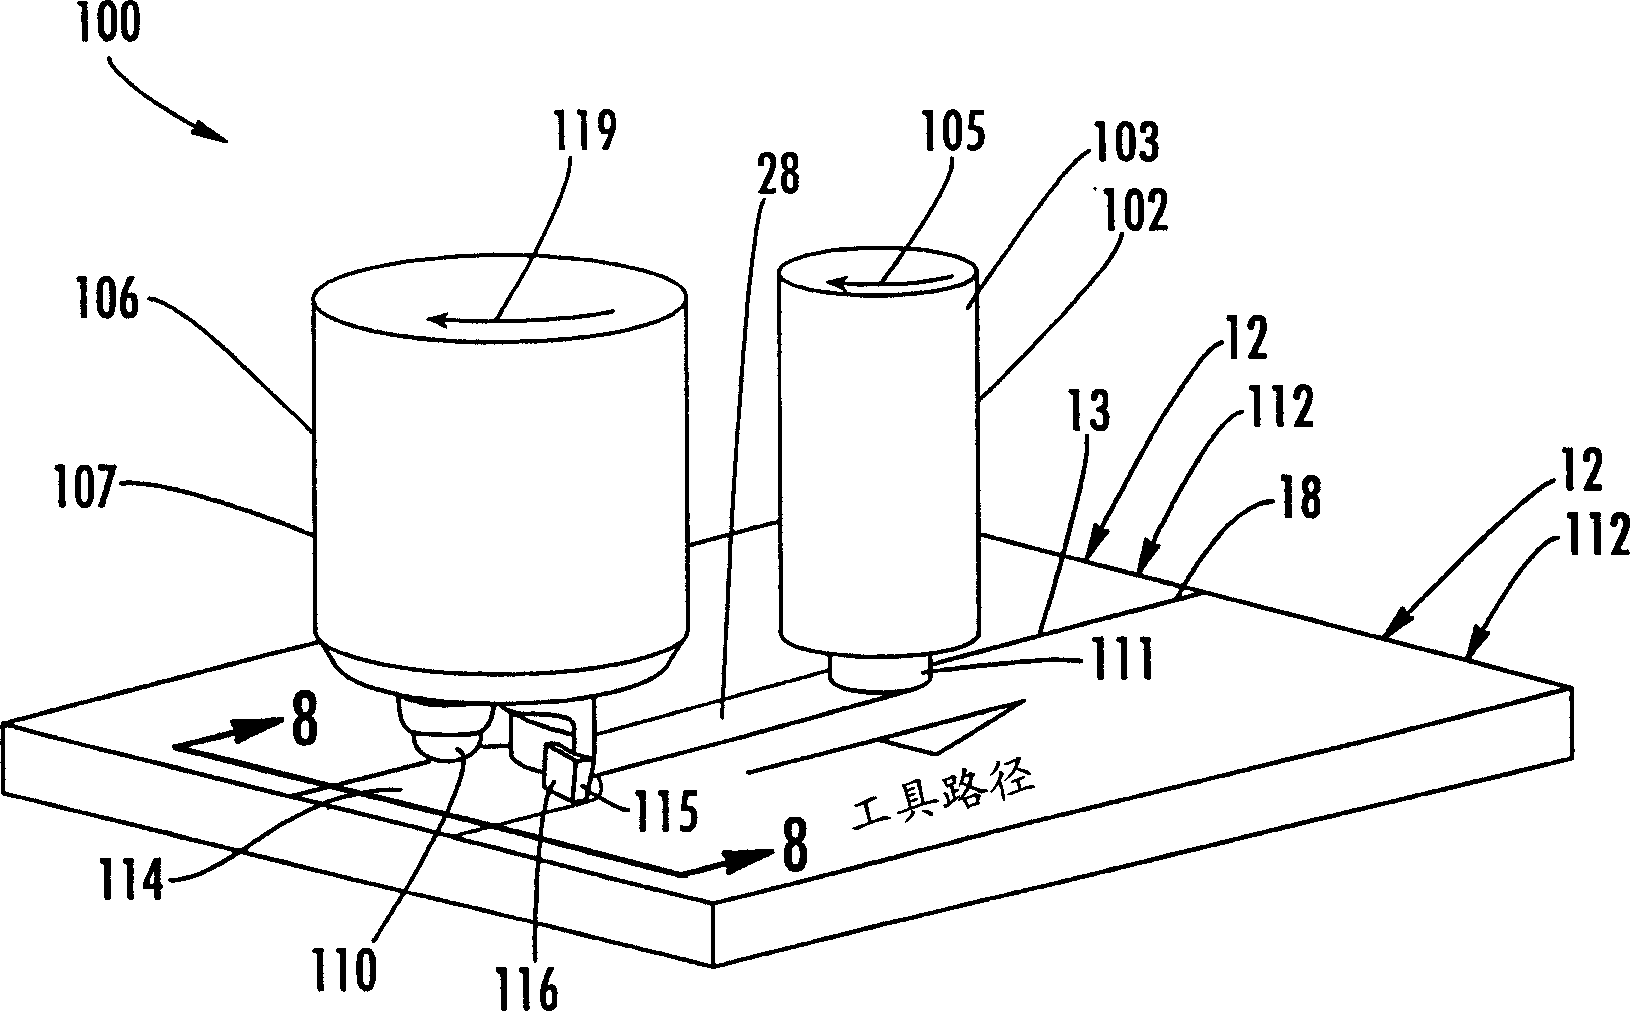 Apparatus and method for forming weld joints having compressive residual stress patterns